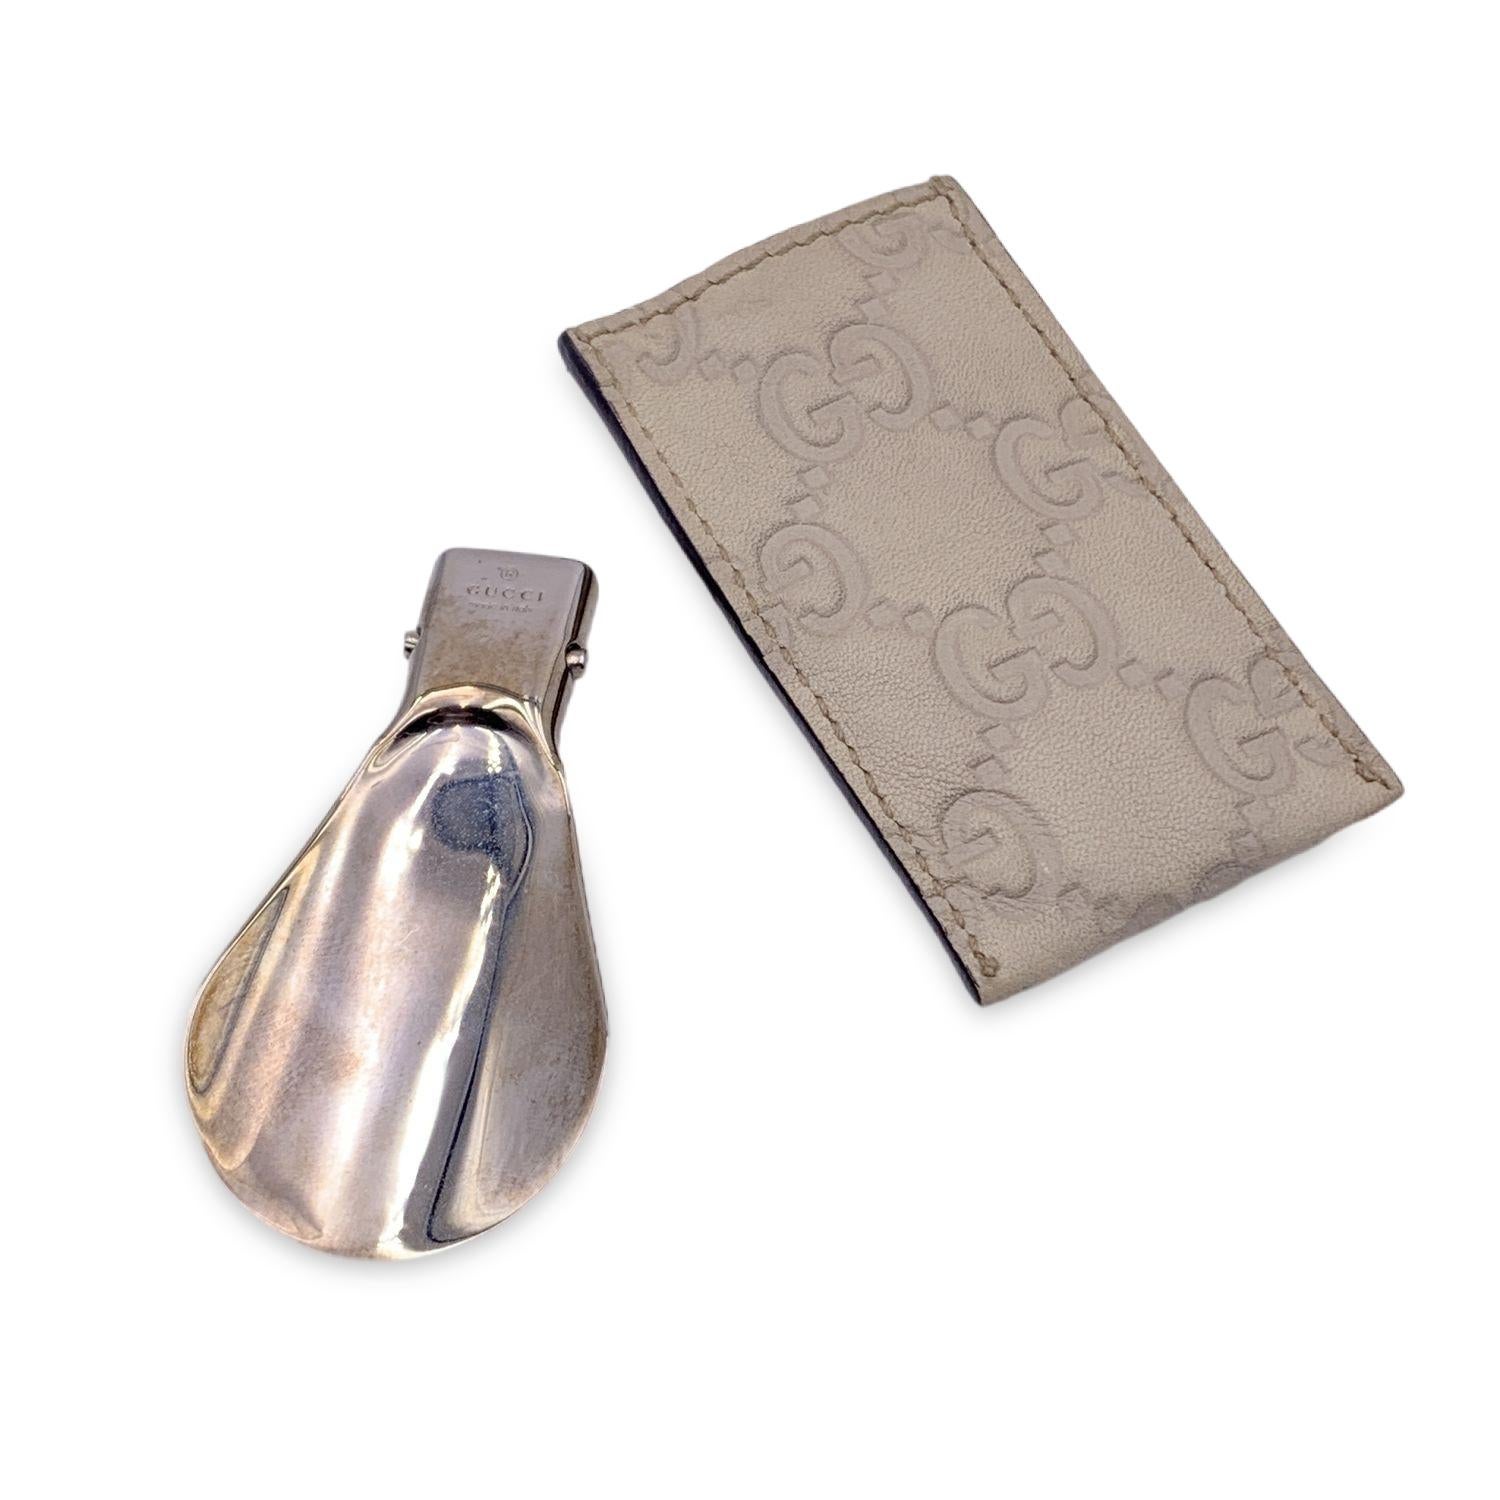 Foldable silver metal mini shoe horn by GUCCI with white Guccissima leather case. 'GUCCI Made in Italy' engraved on the shoehorn. Total lenght: 4.5 inches - 11.4 cm



Details

MATERIAL: Metal

COLOR: Silver

MODEL: n.a.

GENDER: Unisex